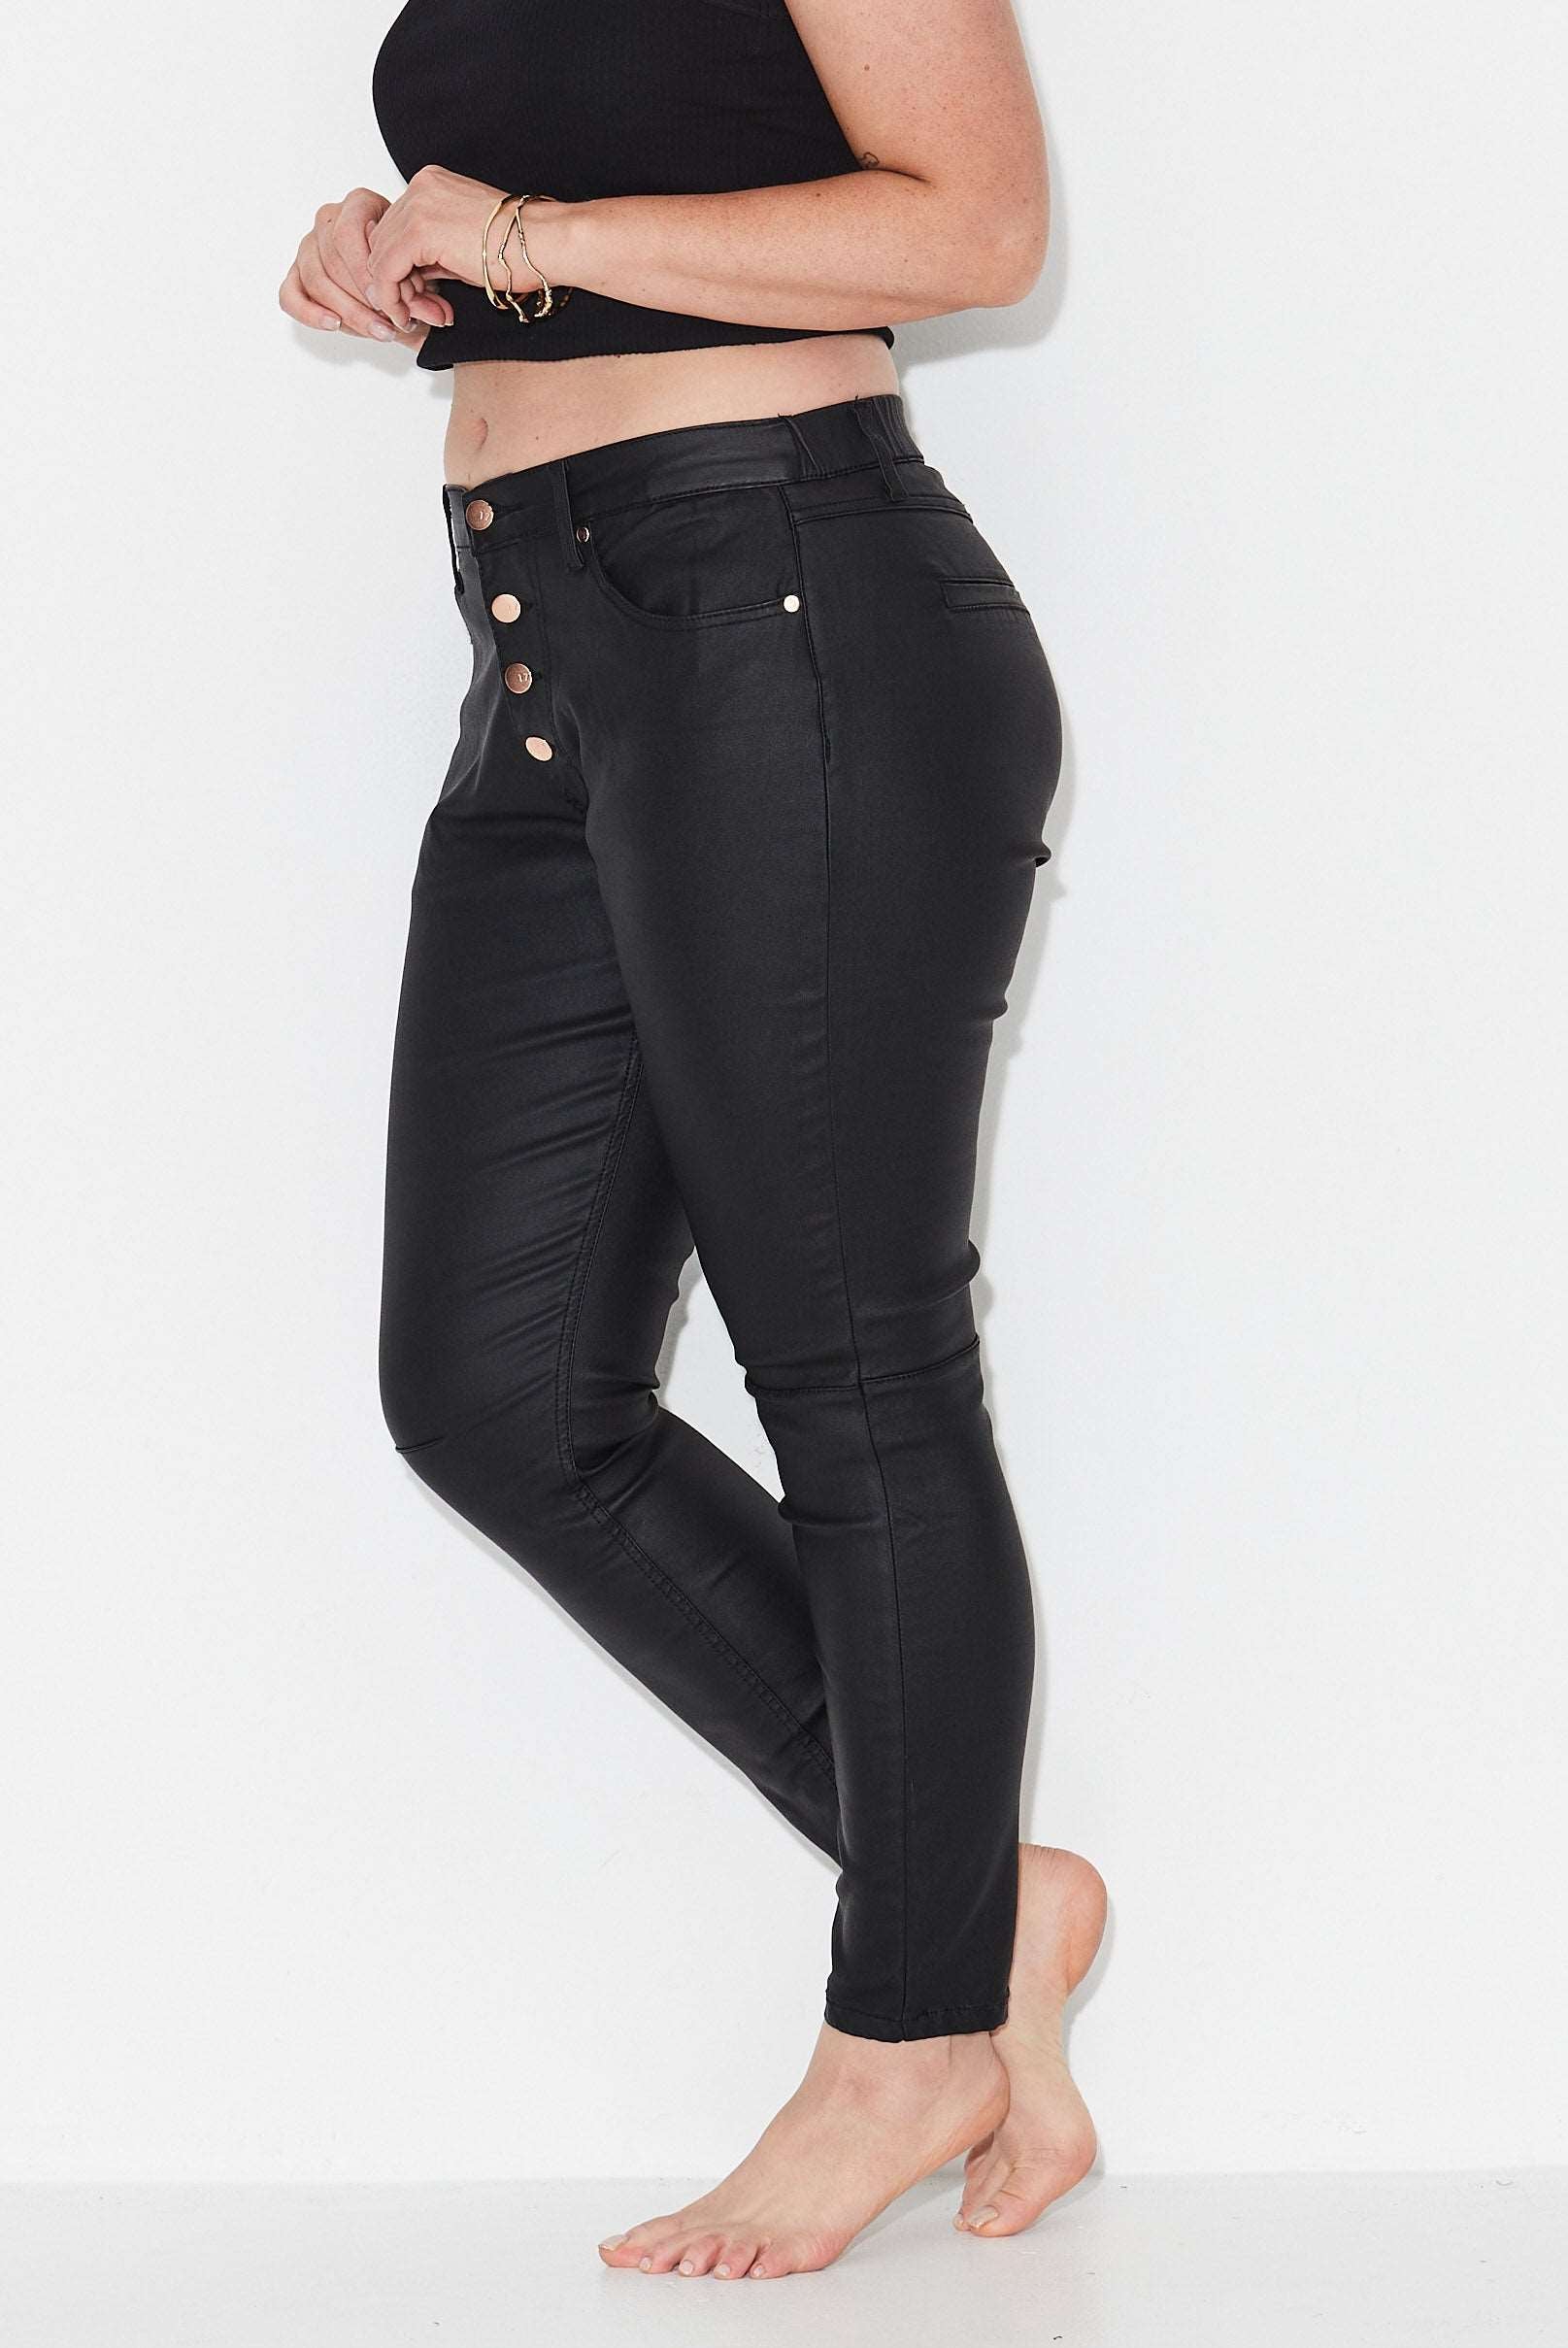 Model wears black plus size leather look jeans with exposed button front 